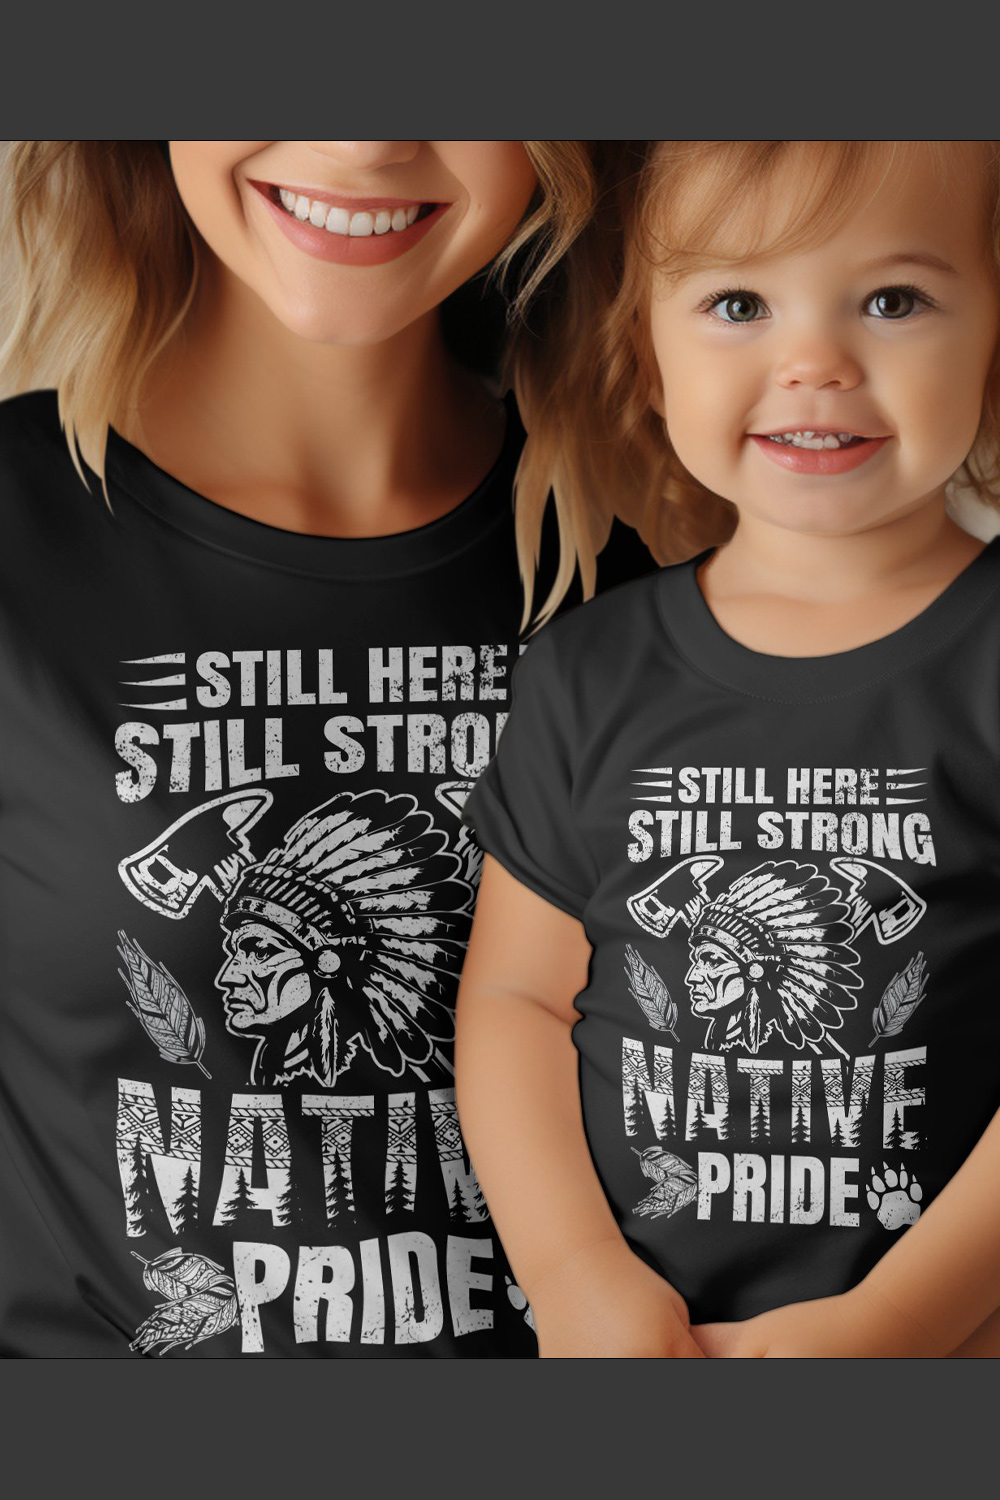 Still here still strong native pride, Native American T-Shirts, Native American Pride Shirts pinterest preview image.